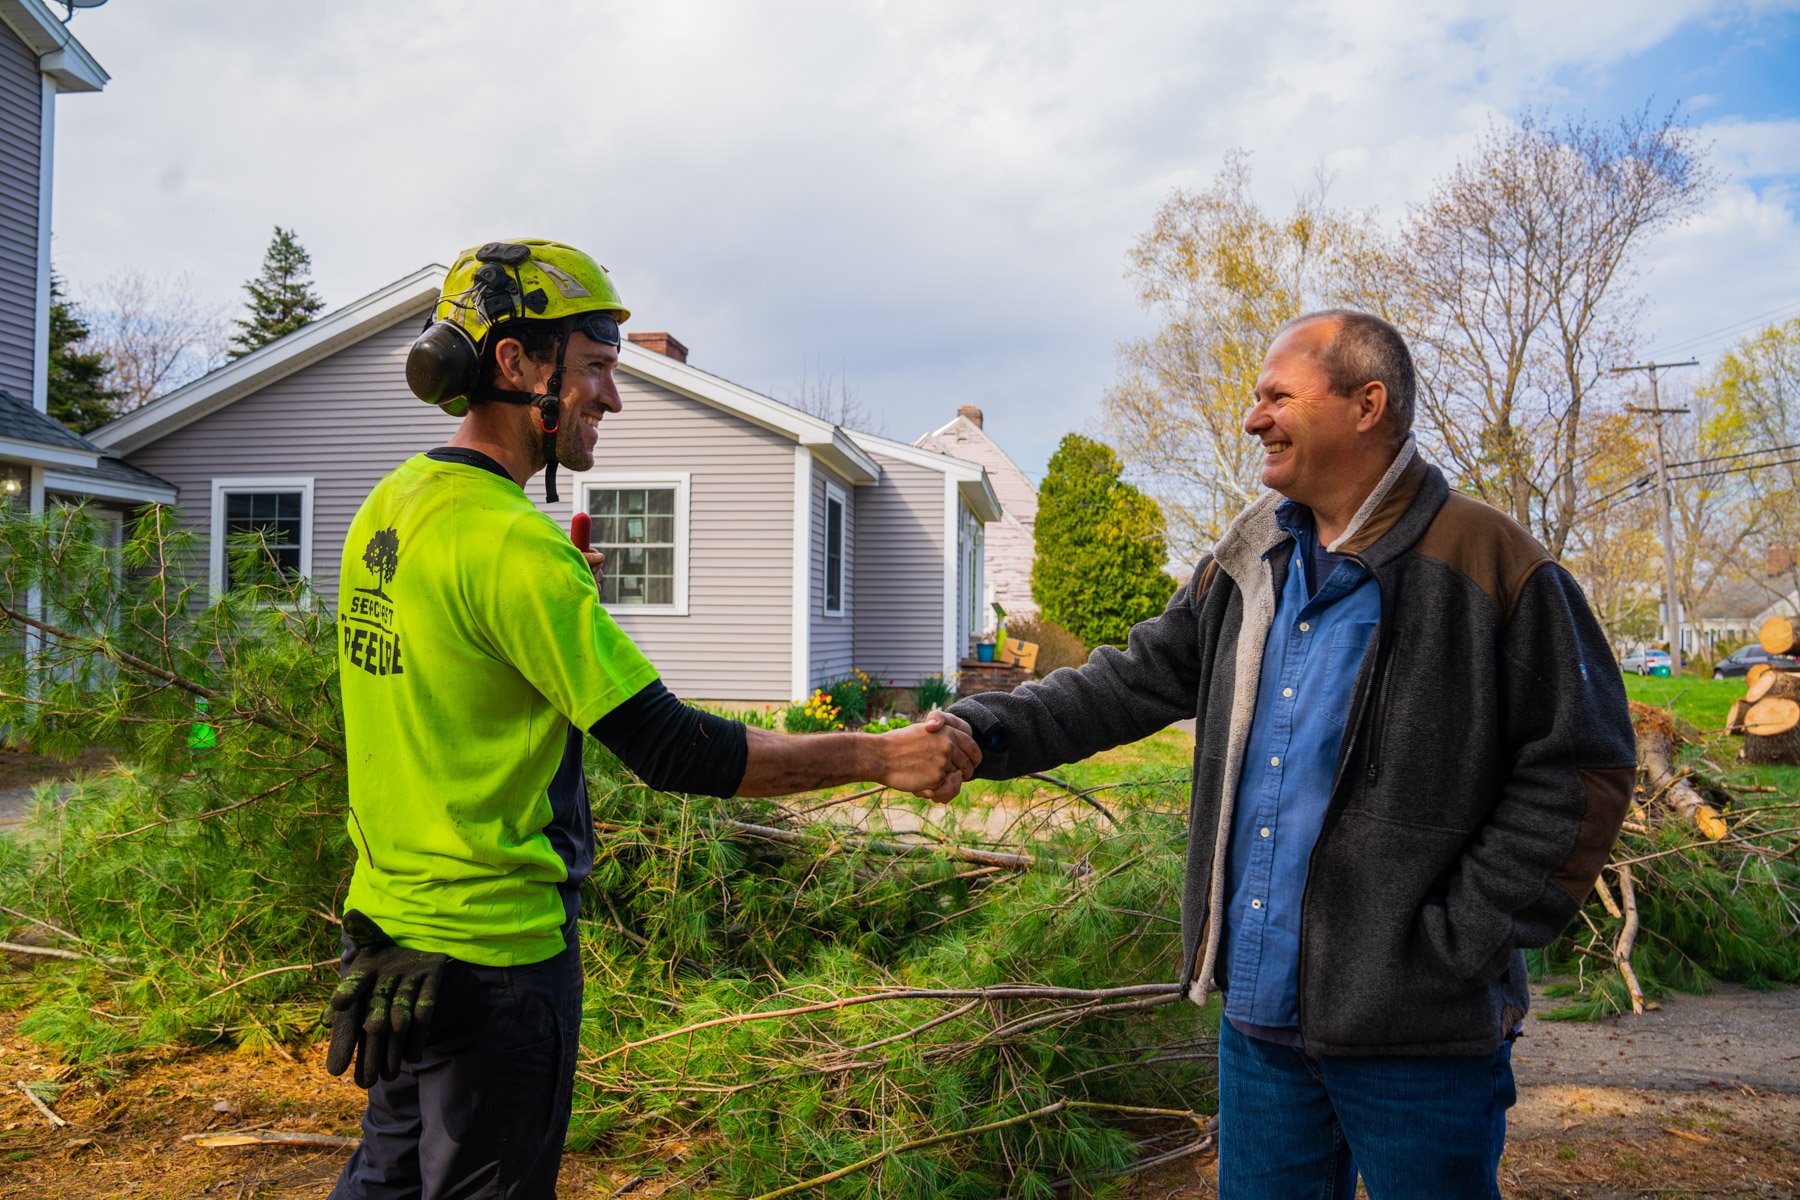 tree service crew leader shakes hands with homeowner